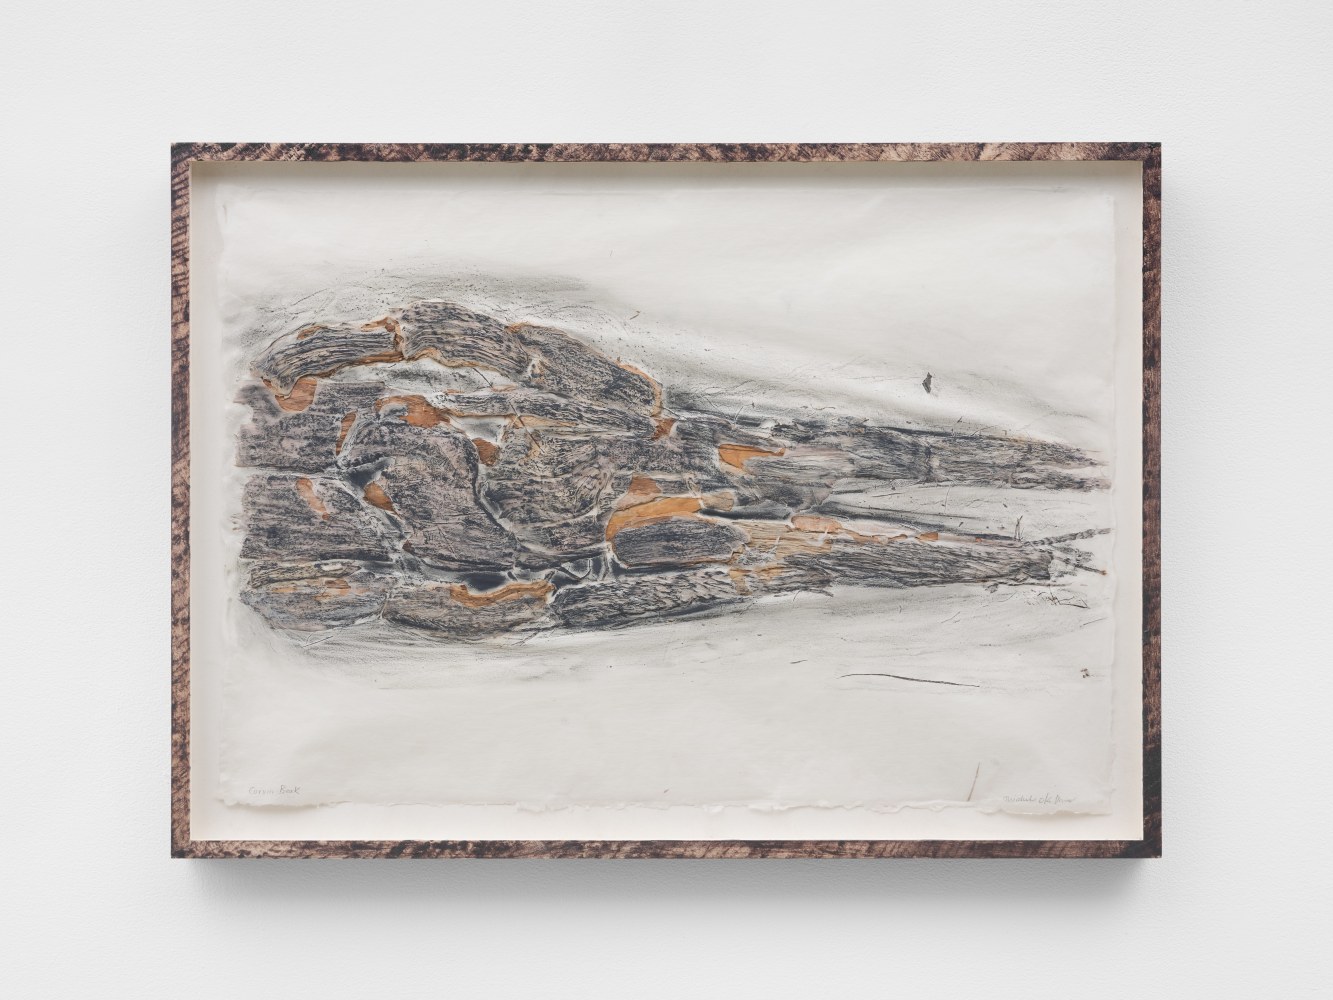 Michele Oka Doner

Corvin Beak, 2013/2020
organic material, charcoal cont&amp;eacute;, and abaca paper in artist&amp;rsquo;s frame

image: 25 &amp;times; 36 in. / 63.5 &amp;times; 91.4 cm

framed: 28 3/4 &amp;times; 39 1/2 in. / 73 &amp;times; 100.3 cm&amp;nbsp;